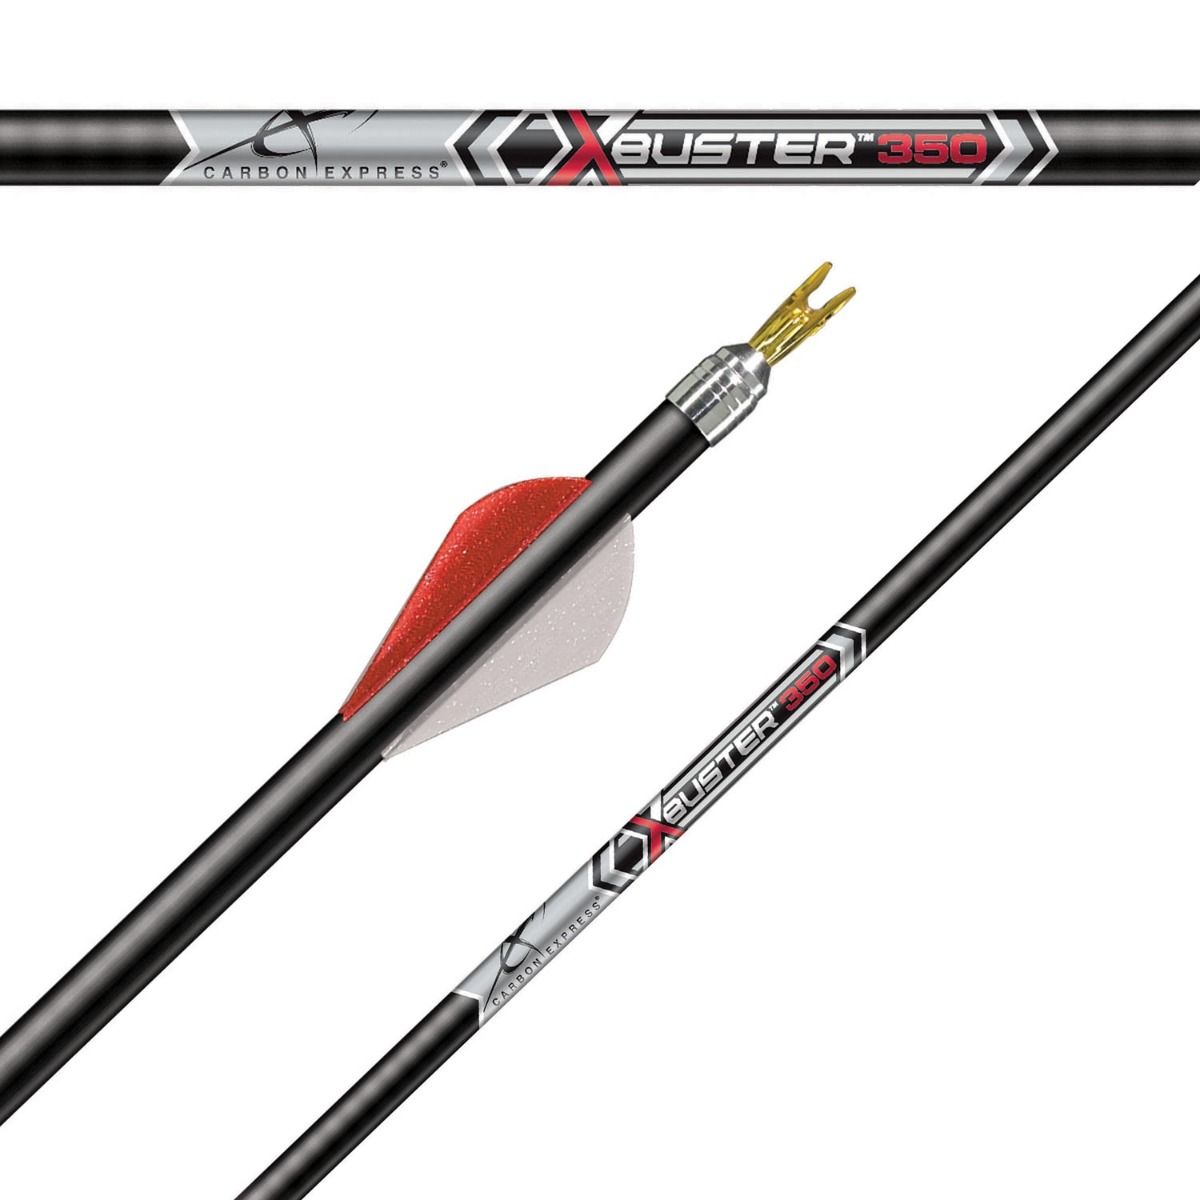 Carbon Express X-Buster Arrow Shafts | Creed Archery Supply